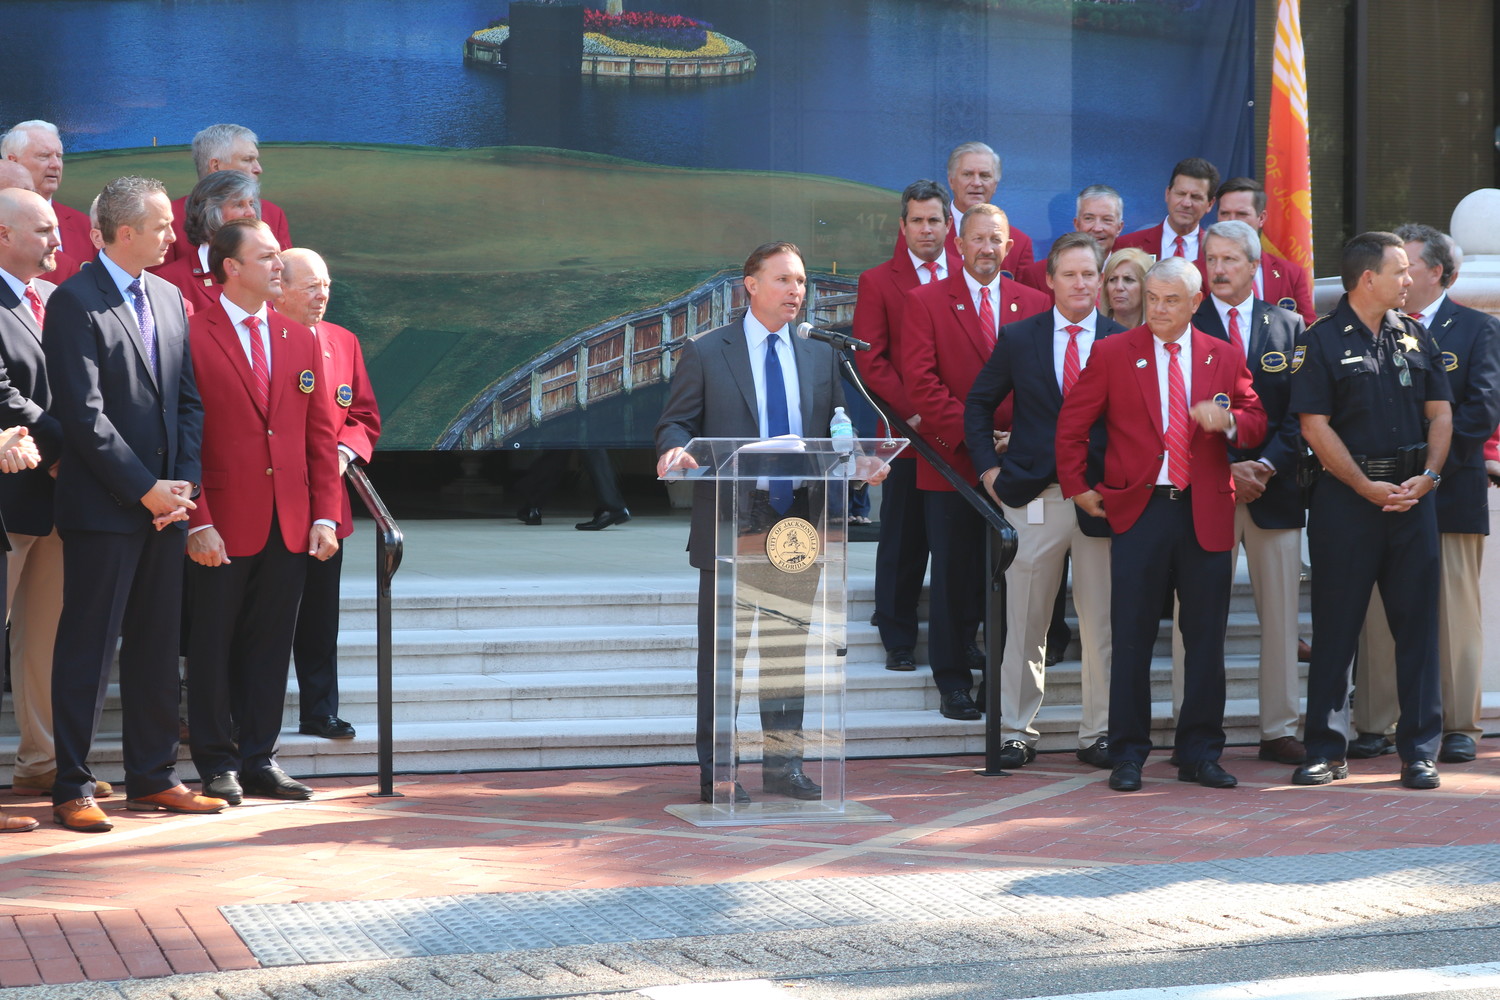 Jacksonville Mayor Lenny Curry proclaims July 13 as THE PLAYERS Championship Charity Day in celebration of the tournament’s accomplishments.